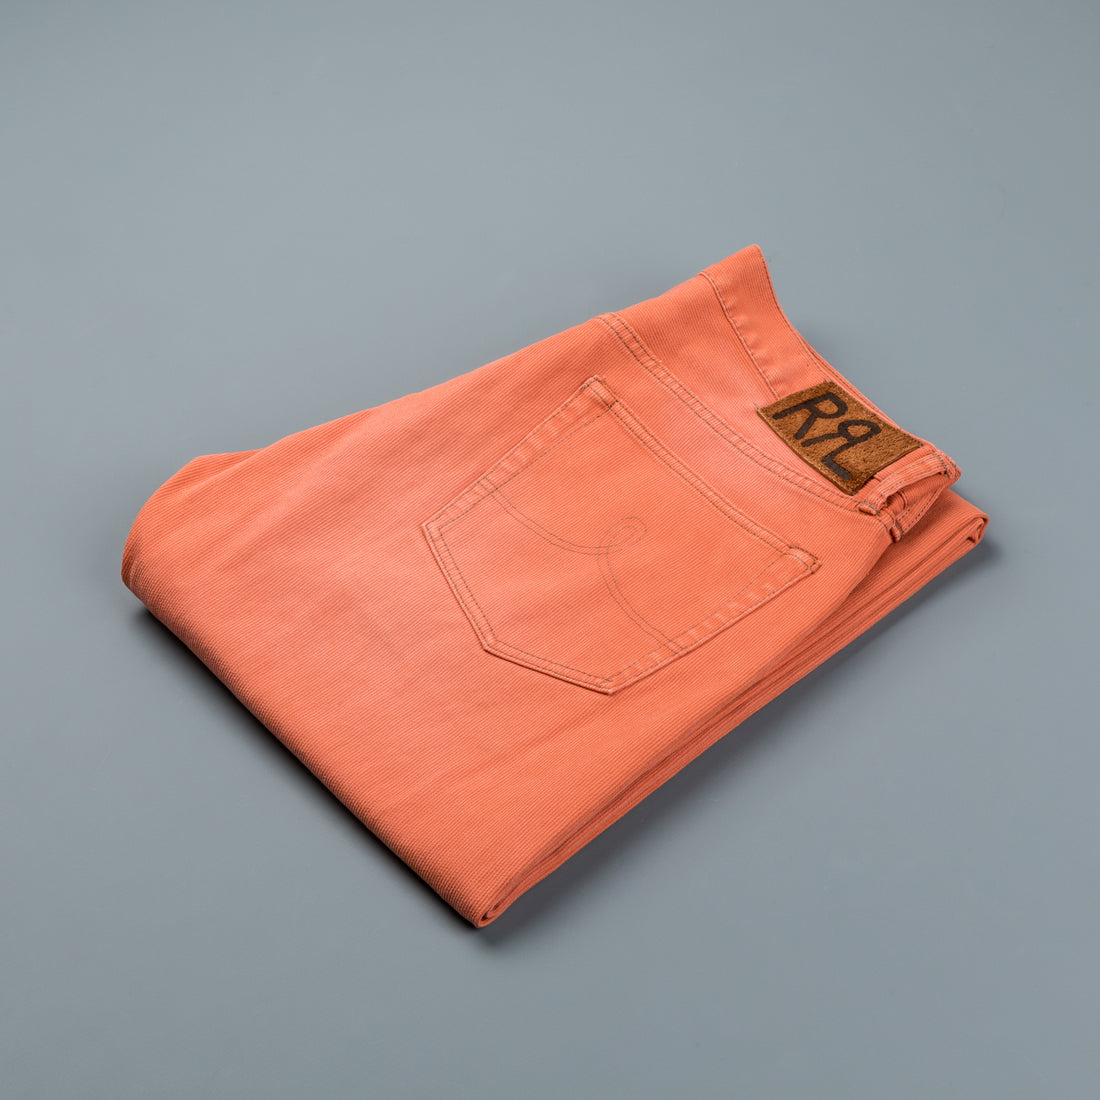 RRL Straight Leg Pant Bedford Faded Coral